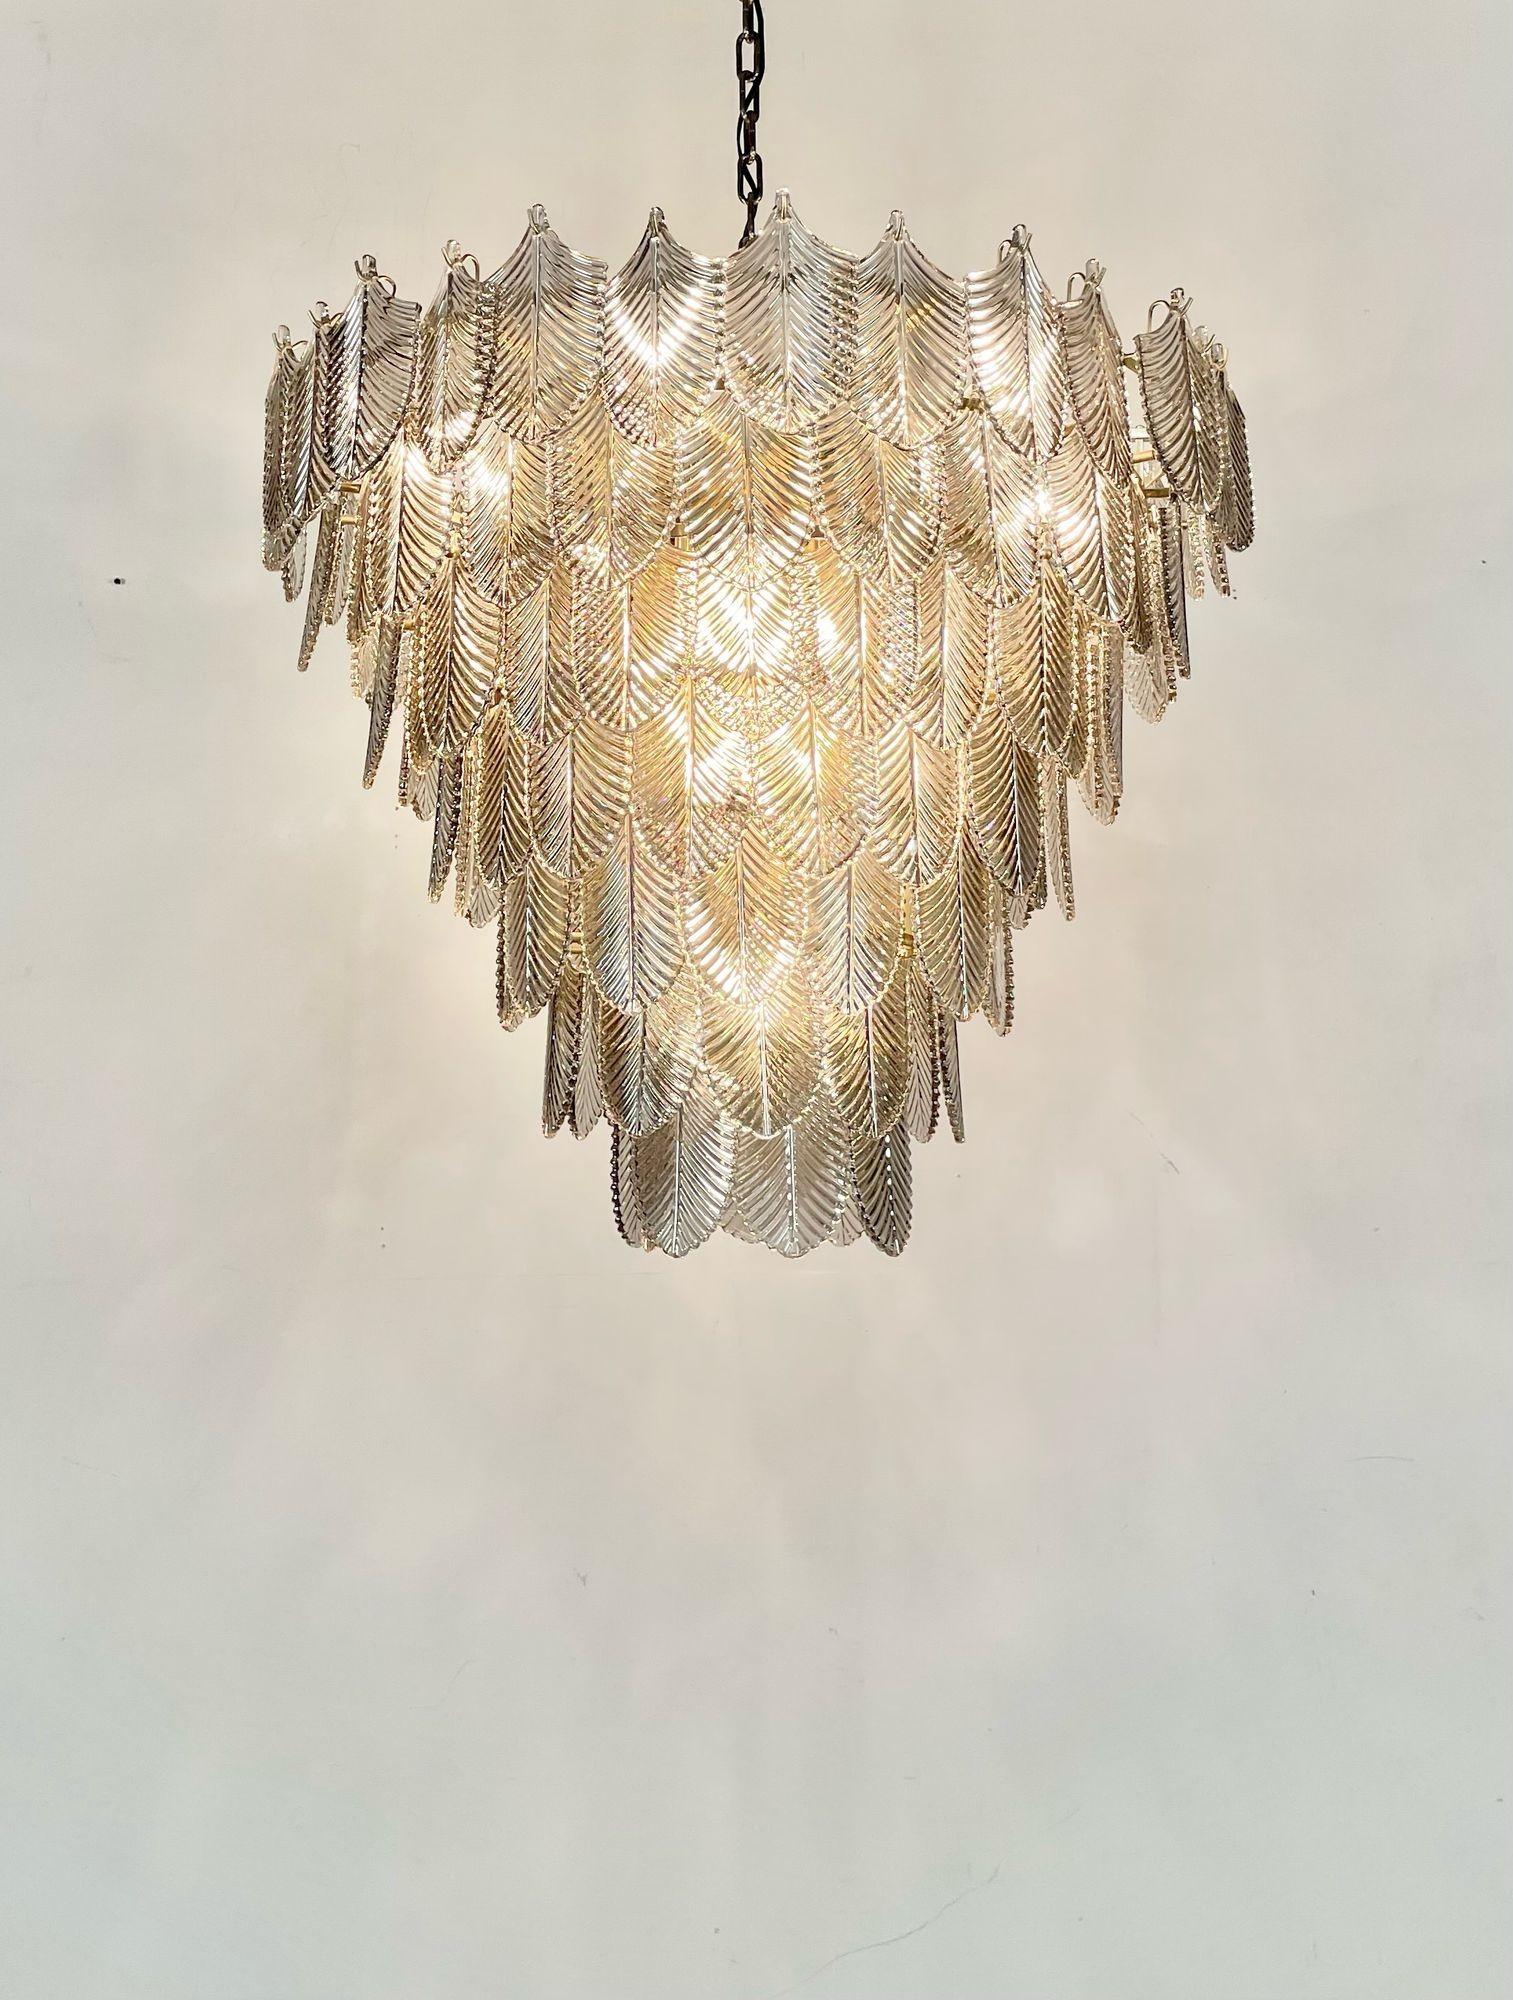 Contemporary Modern Art Deco Style Chandelier / Pendant, Brass and Smoked Glass by Eicholtz For Sale